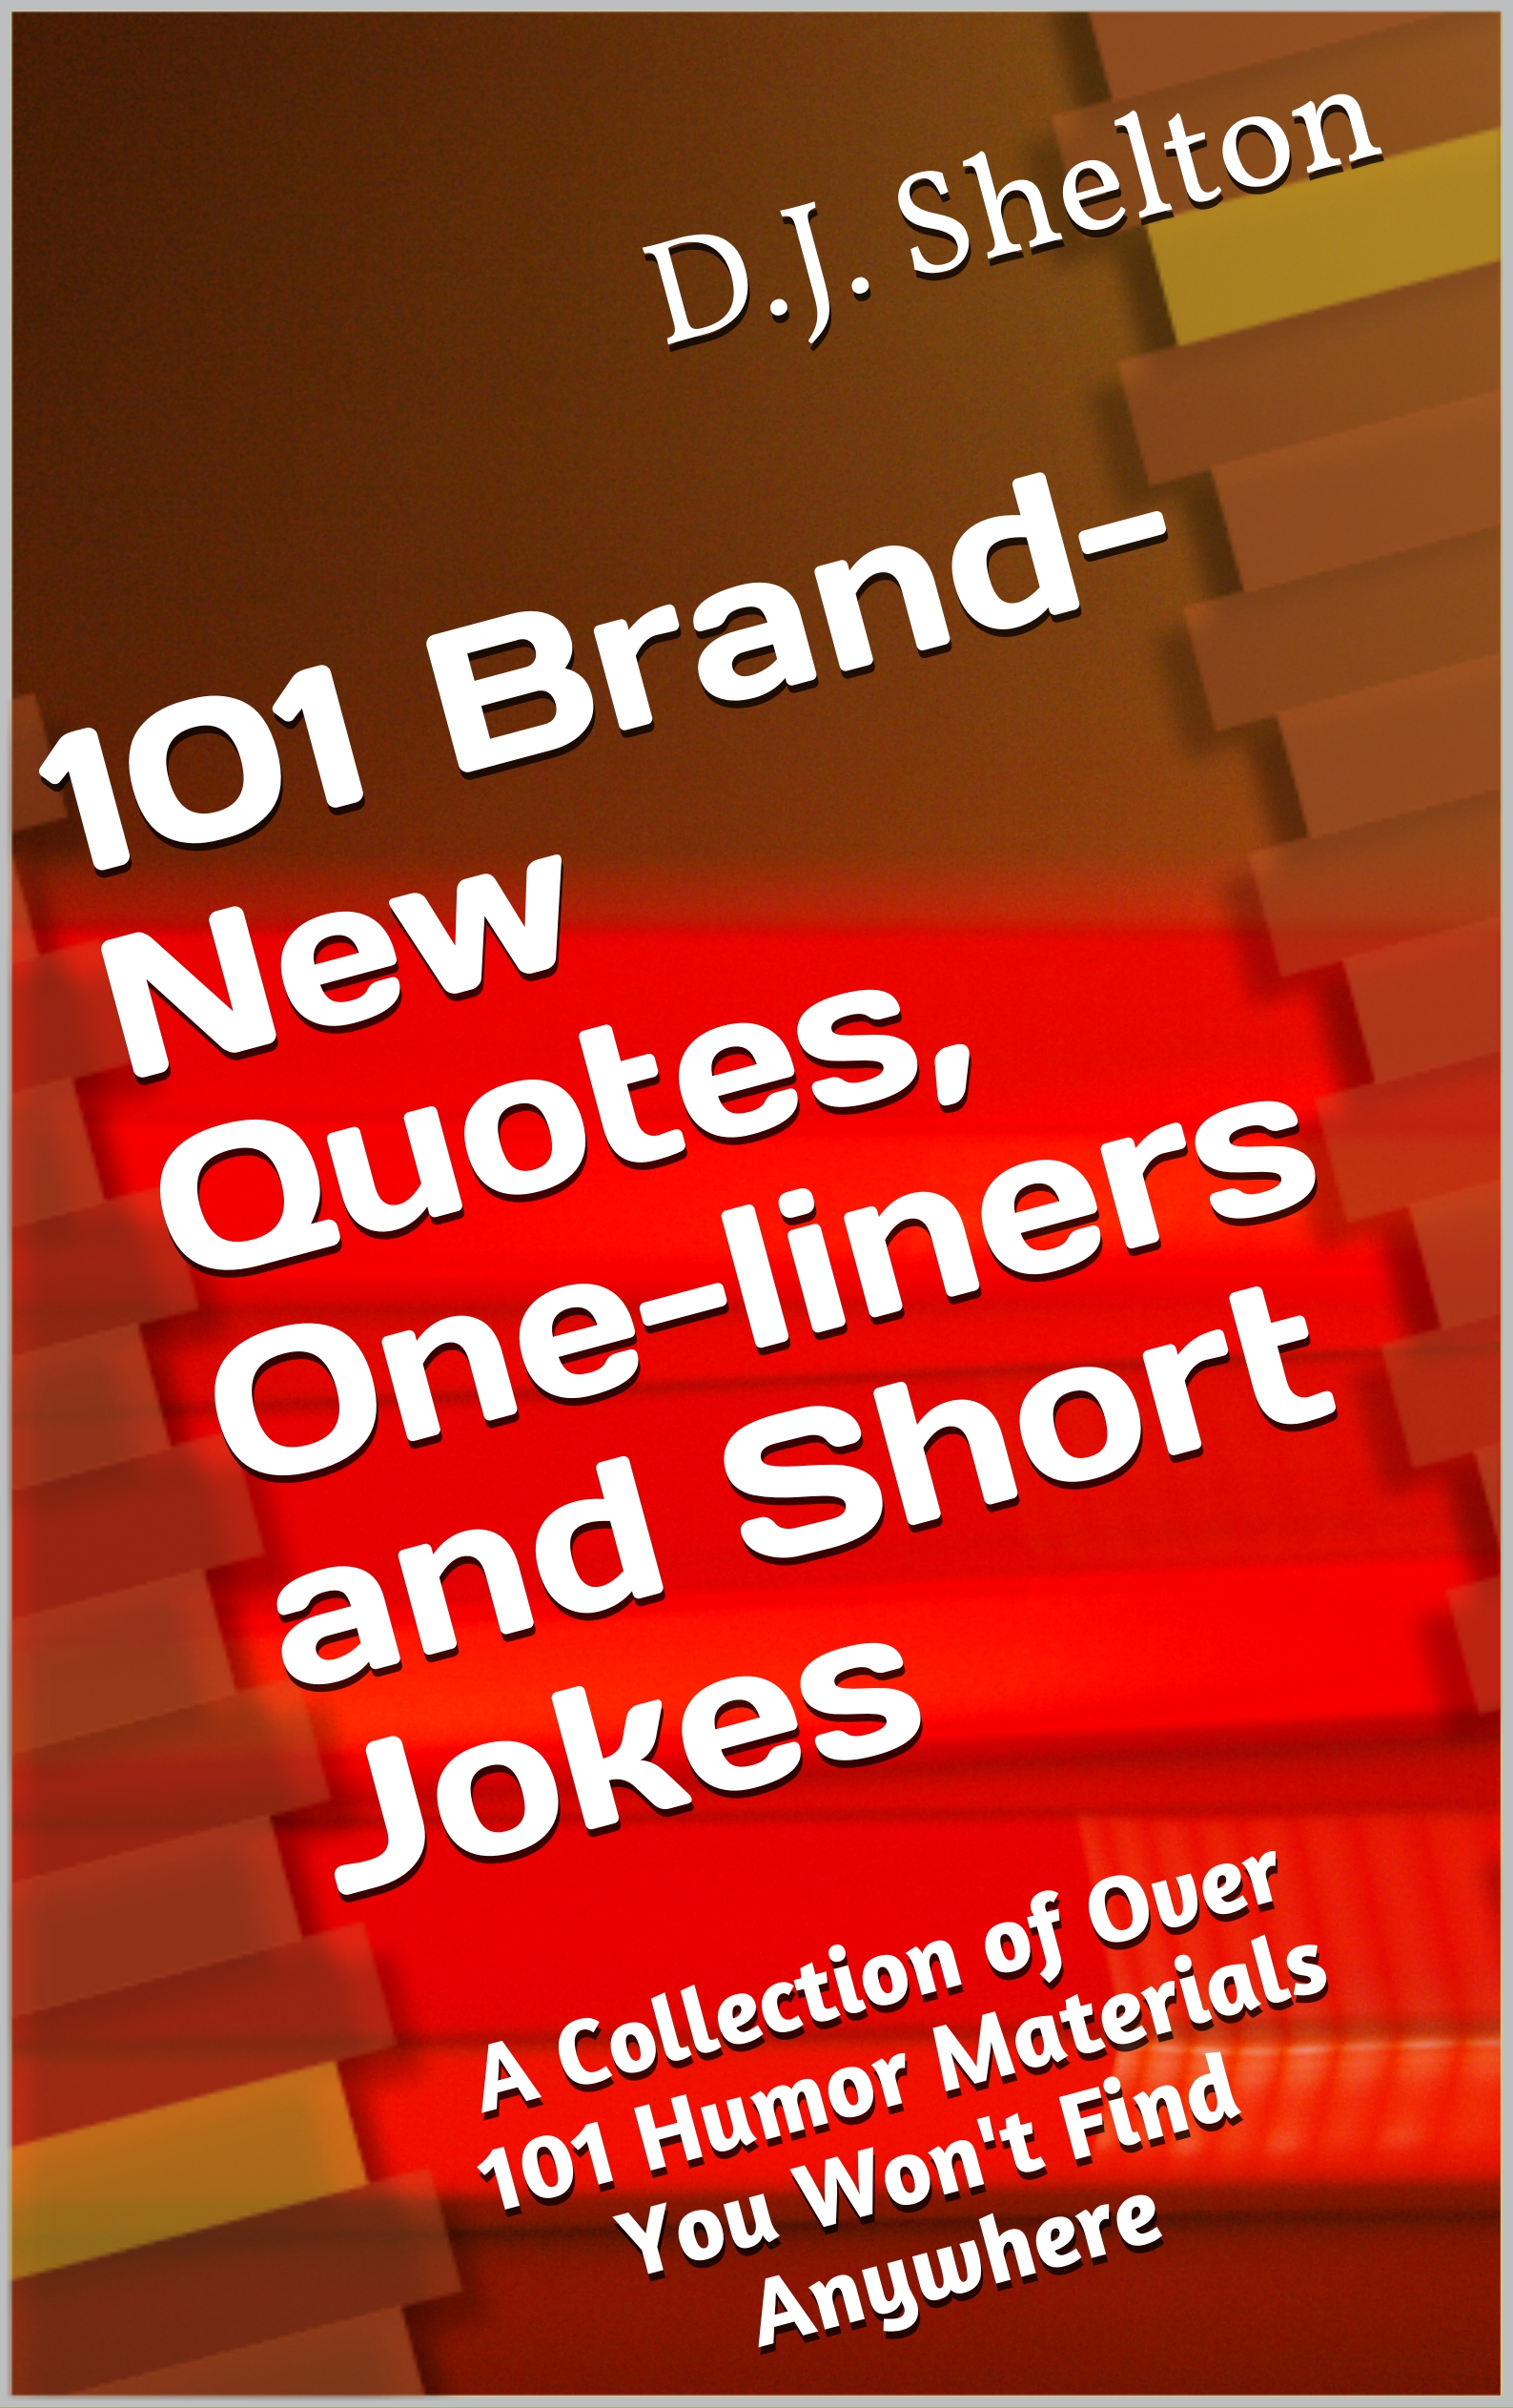 FREE: 101 Brand-New Quotes, One-liners and Short Jokes: A Collection of Over 101 Humor Materials You Won’t Find Anywhere by D.J. Shelton